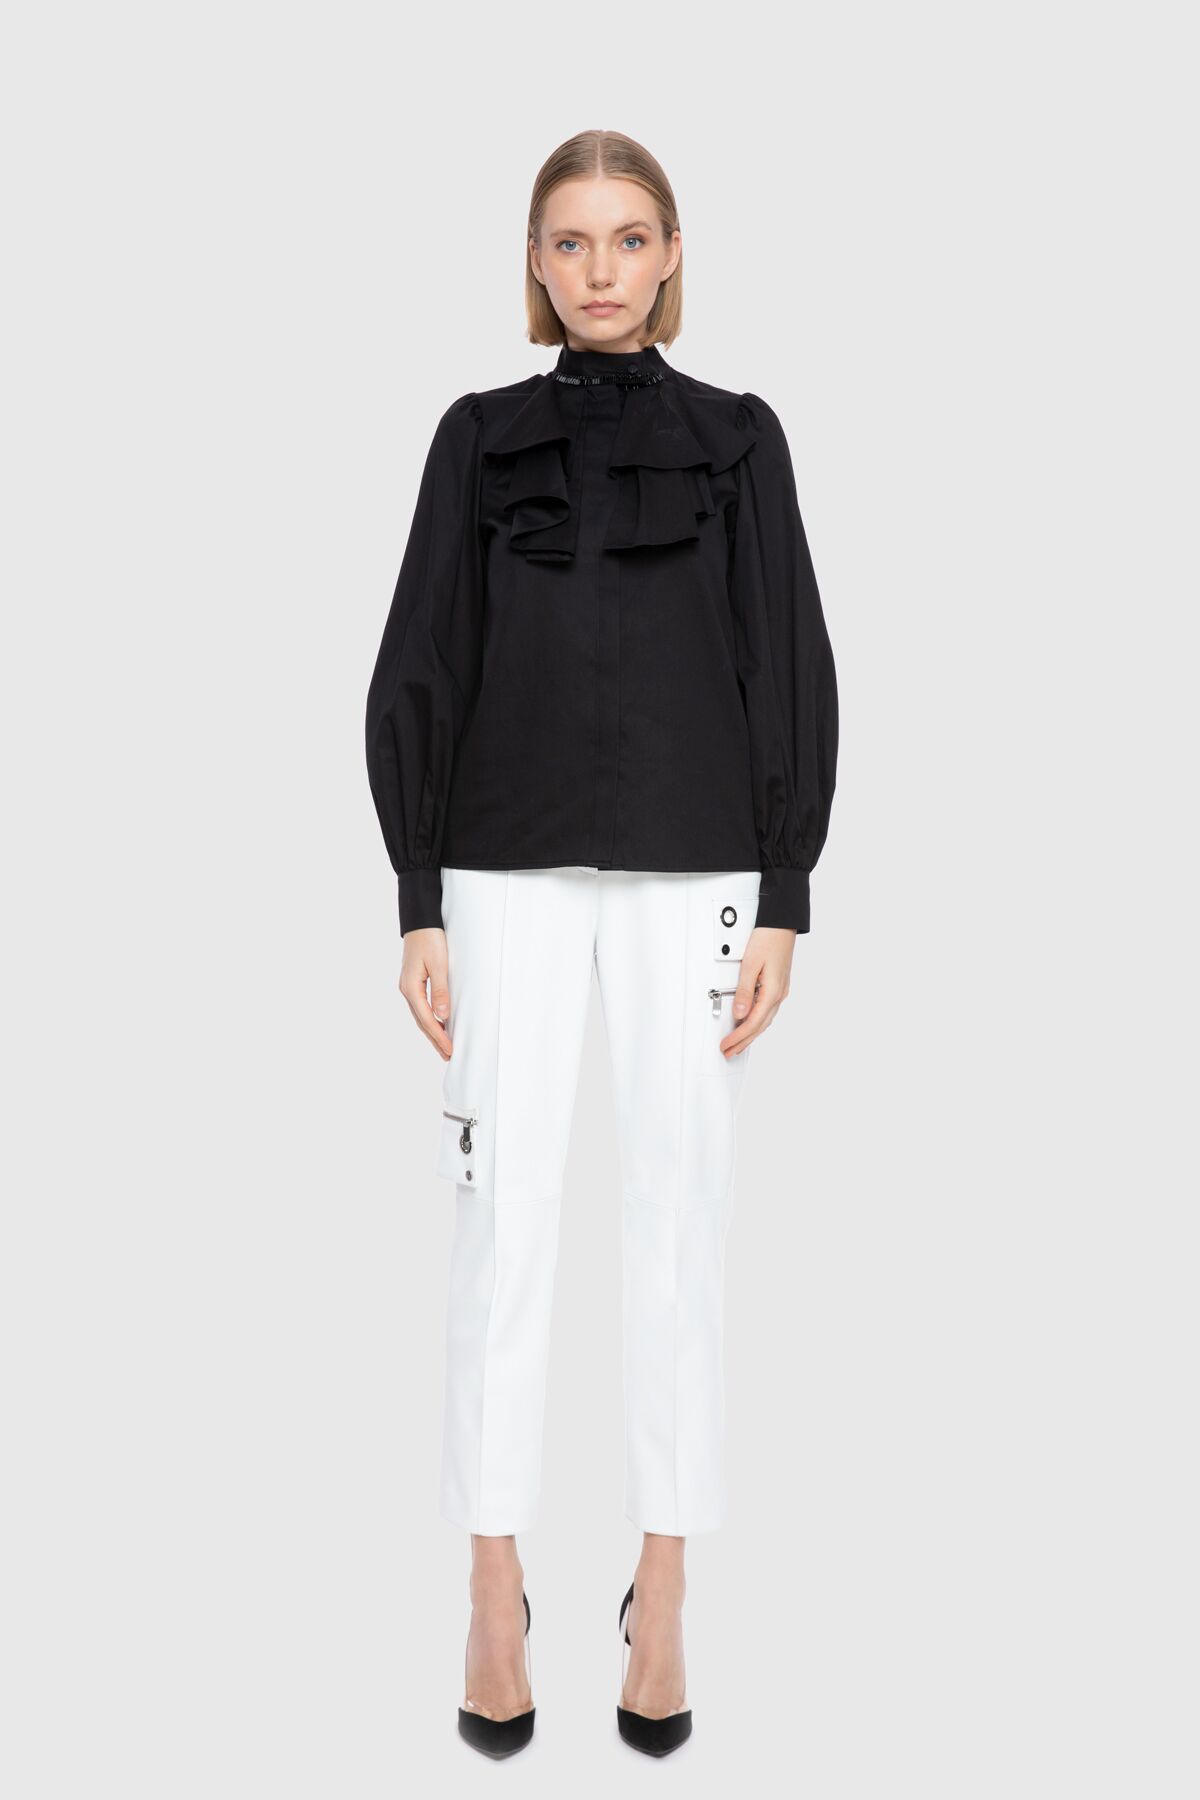  GIZIA - With Volan Detailed Embroidered Collar Black Shirt